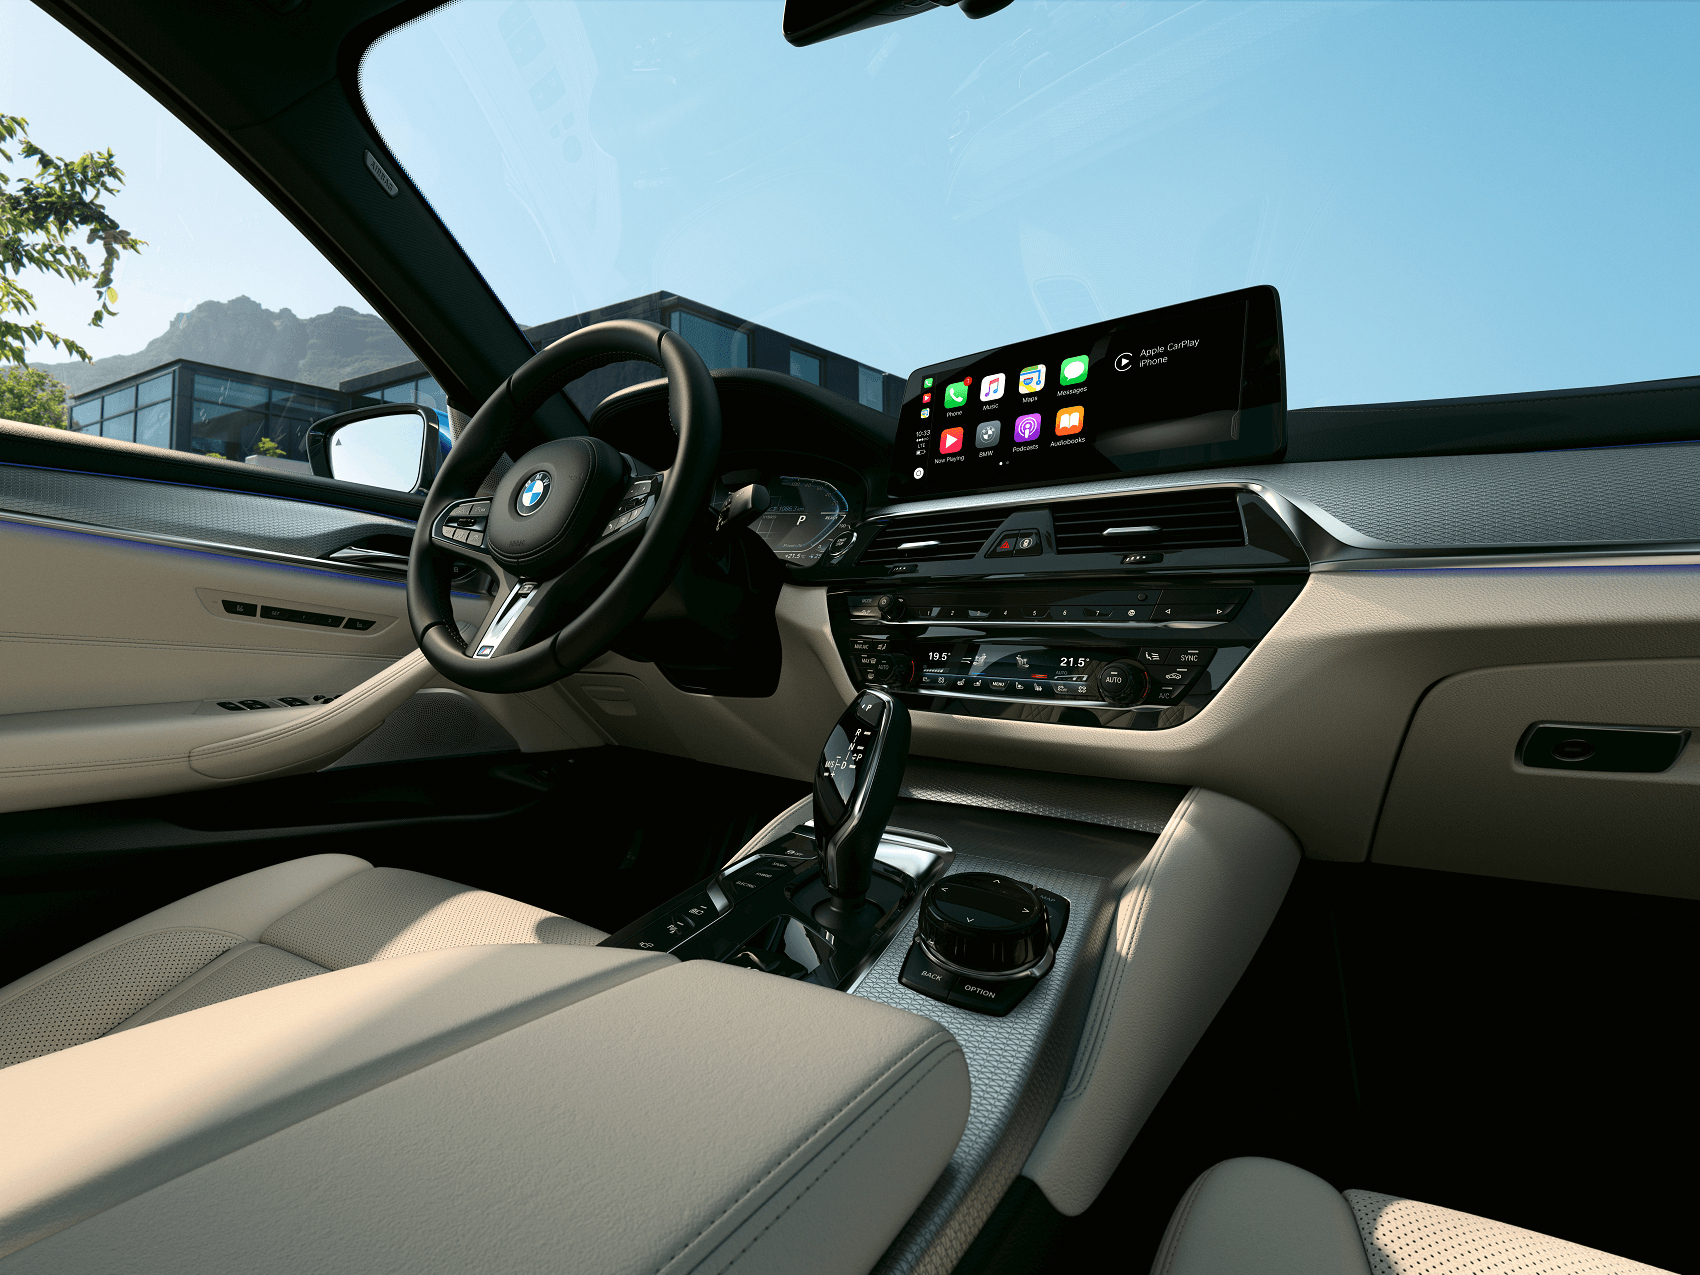 BMW 5 Series Technology Features